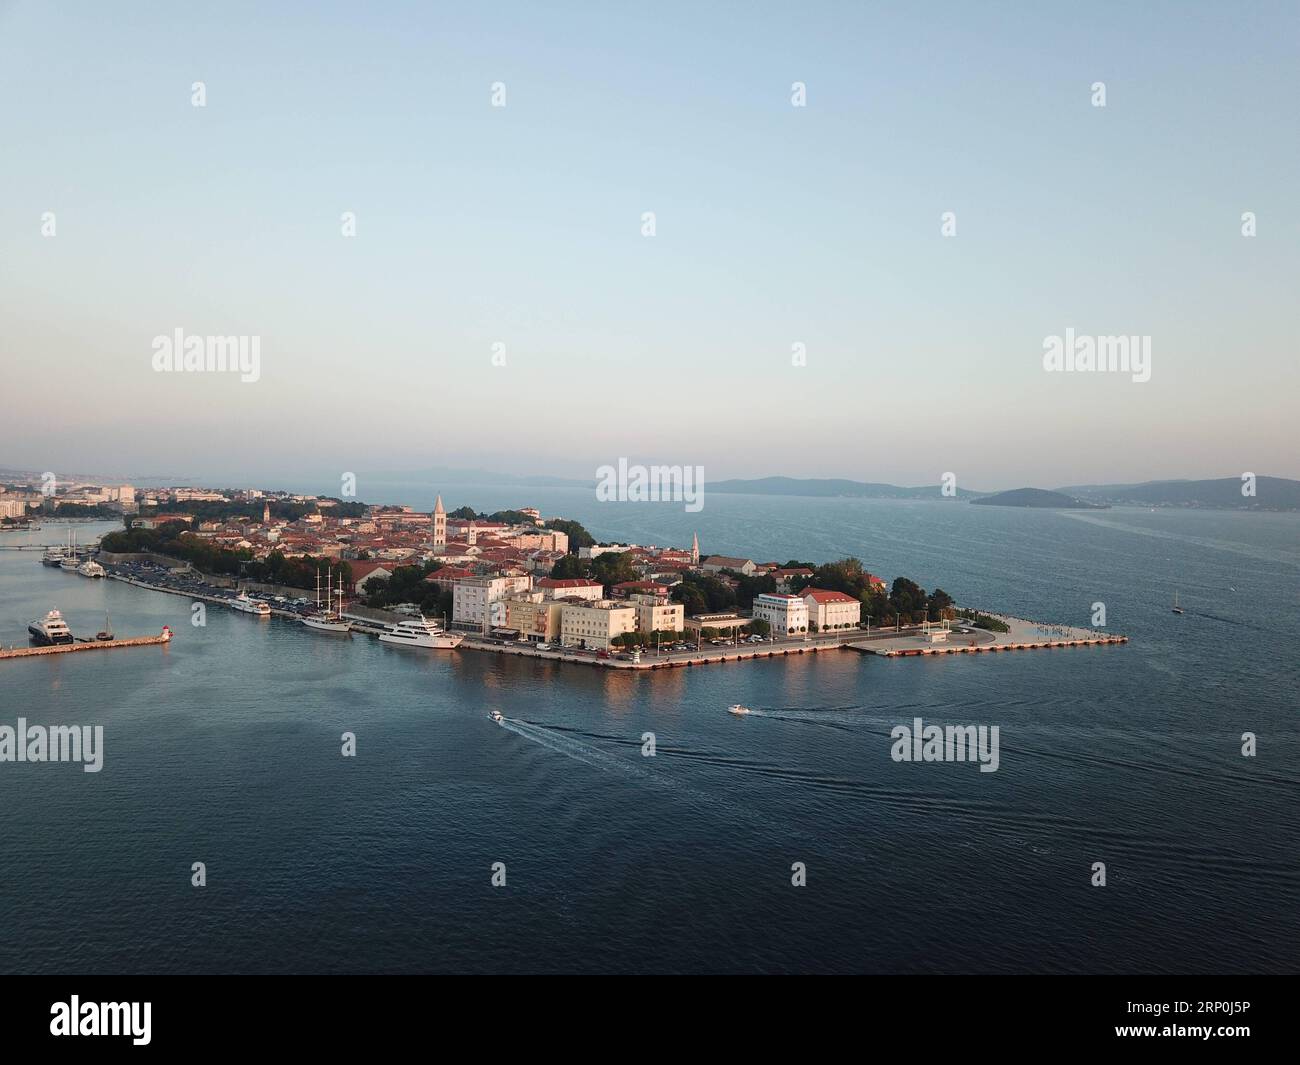 (180516) -- ZAGREB, May 16, 2018 -- Aerial photo taken on May 13, 2018 shows scenery of coastal city Zadar in Croatia. Zadar city is one of the well known Croatian tourist attractions situated on the Adriatic Sea along the west coast of the country. ) (ly) CROATIA-ZADAR-SCENERY GaoxLei PUBLICATIONxNOTxINxCHN Stock Photo